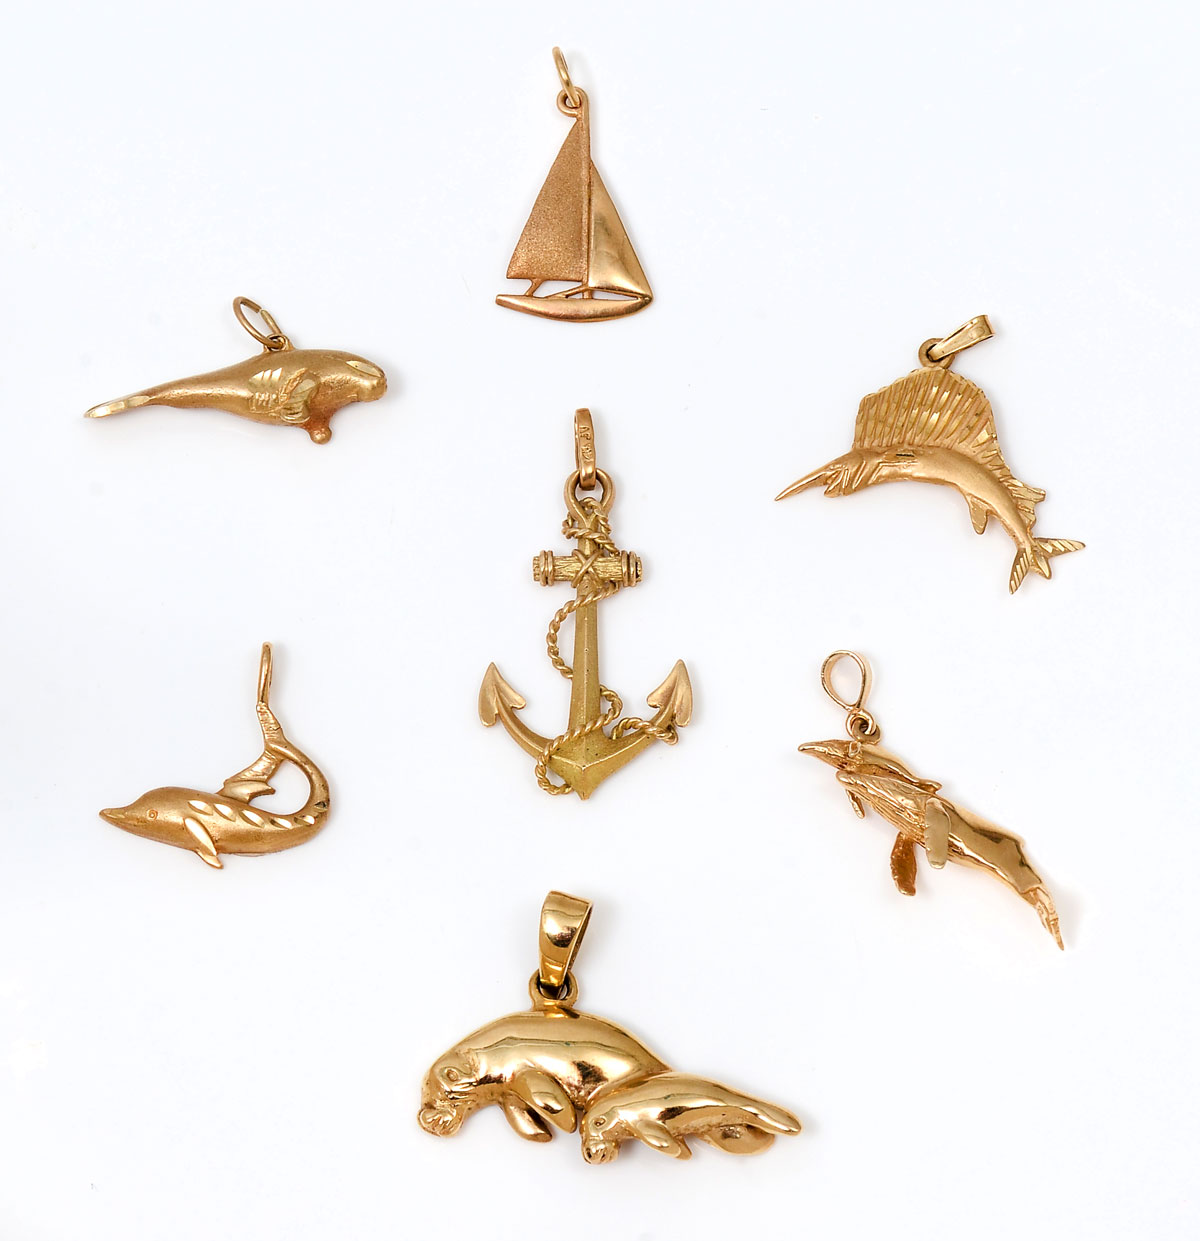 7 SEA CREATURE CHARMS IN 14K 7 2741c9